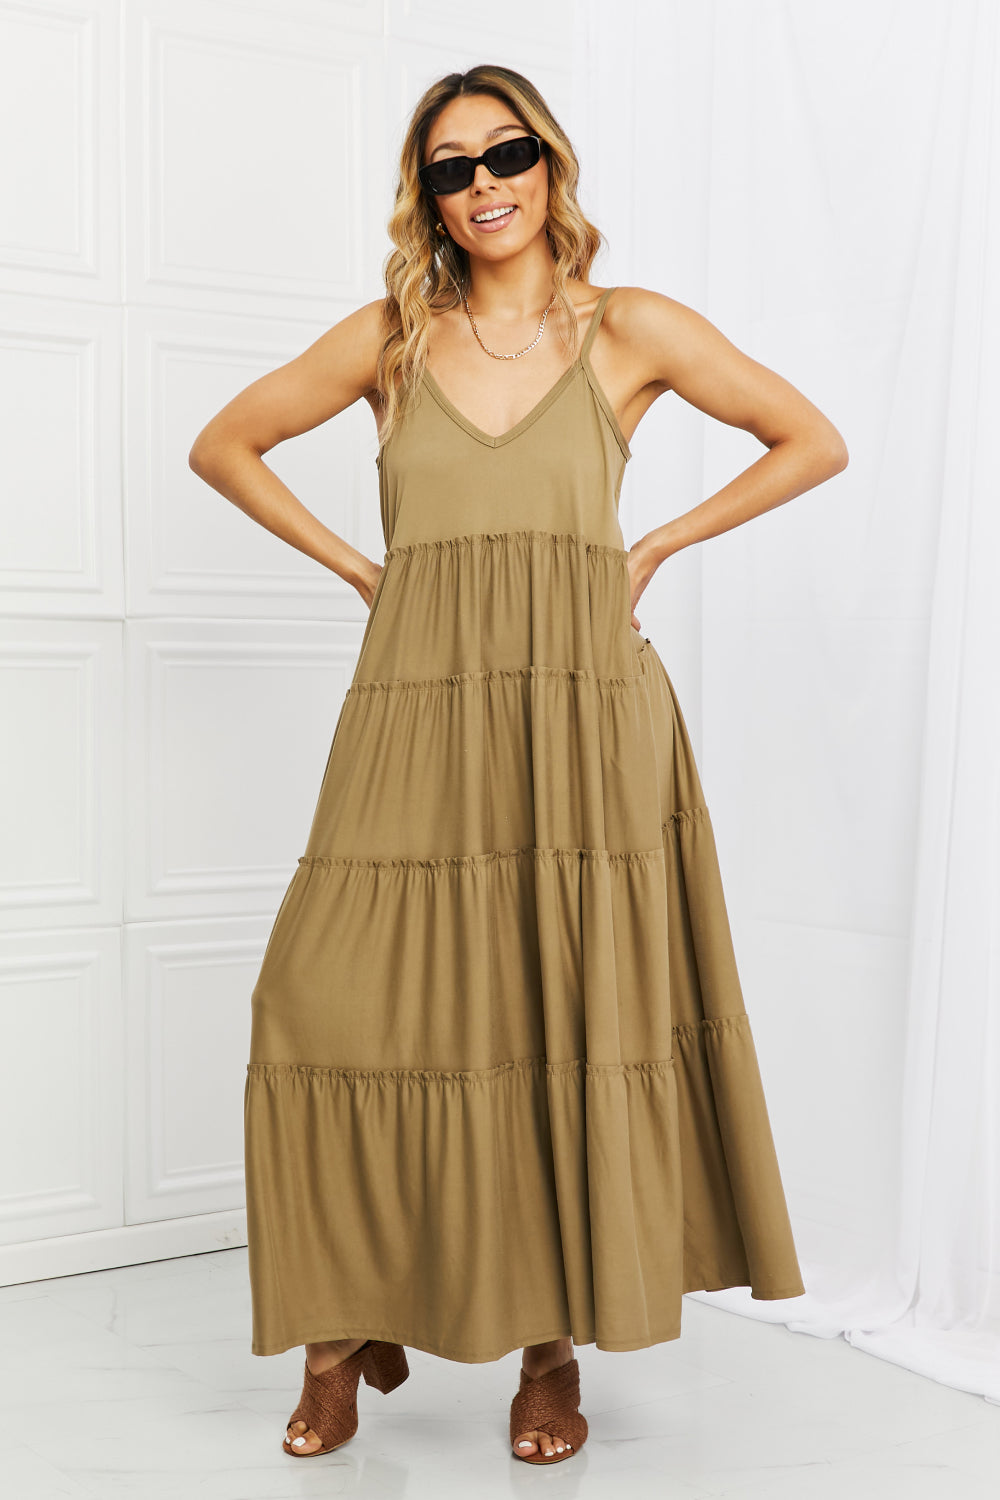 Modest Spaghetti Strap Tiered Dress with Pockets in Khaki